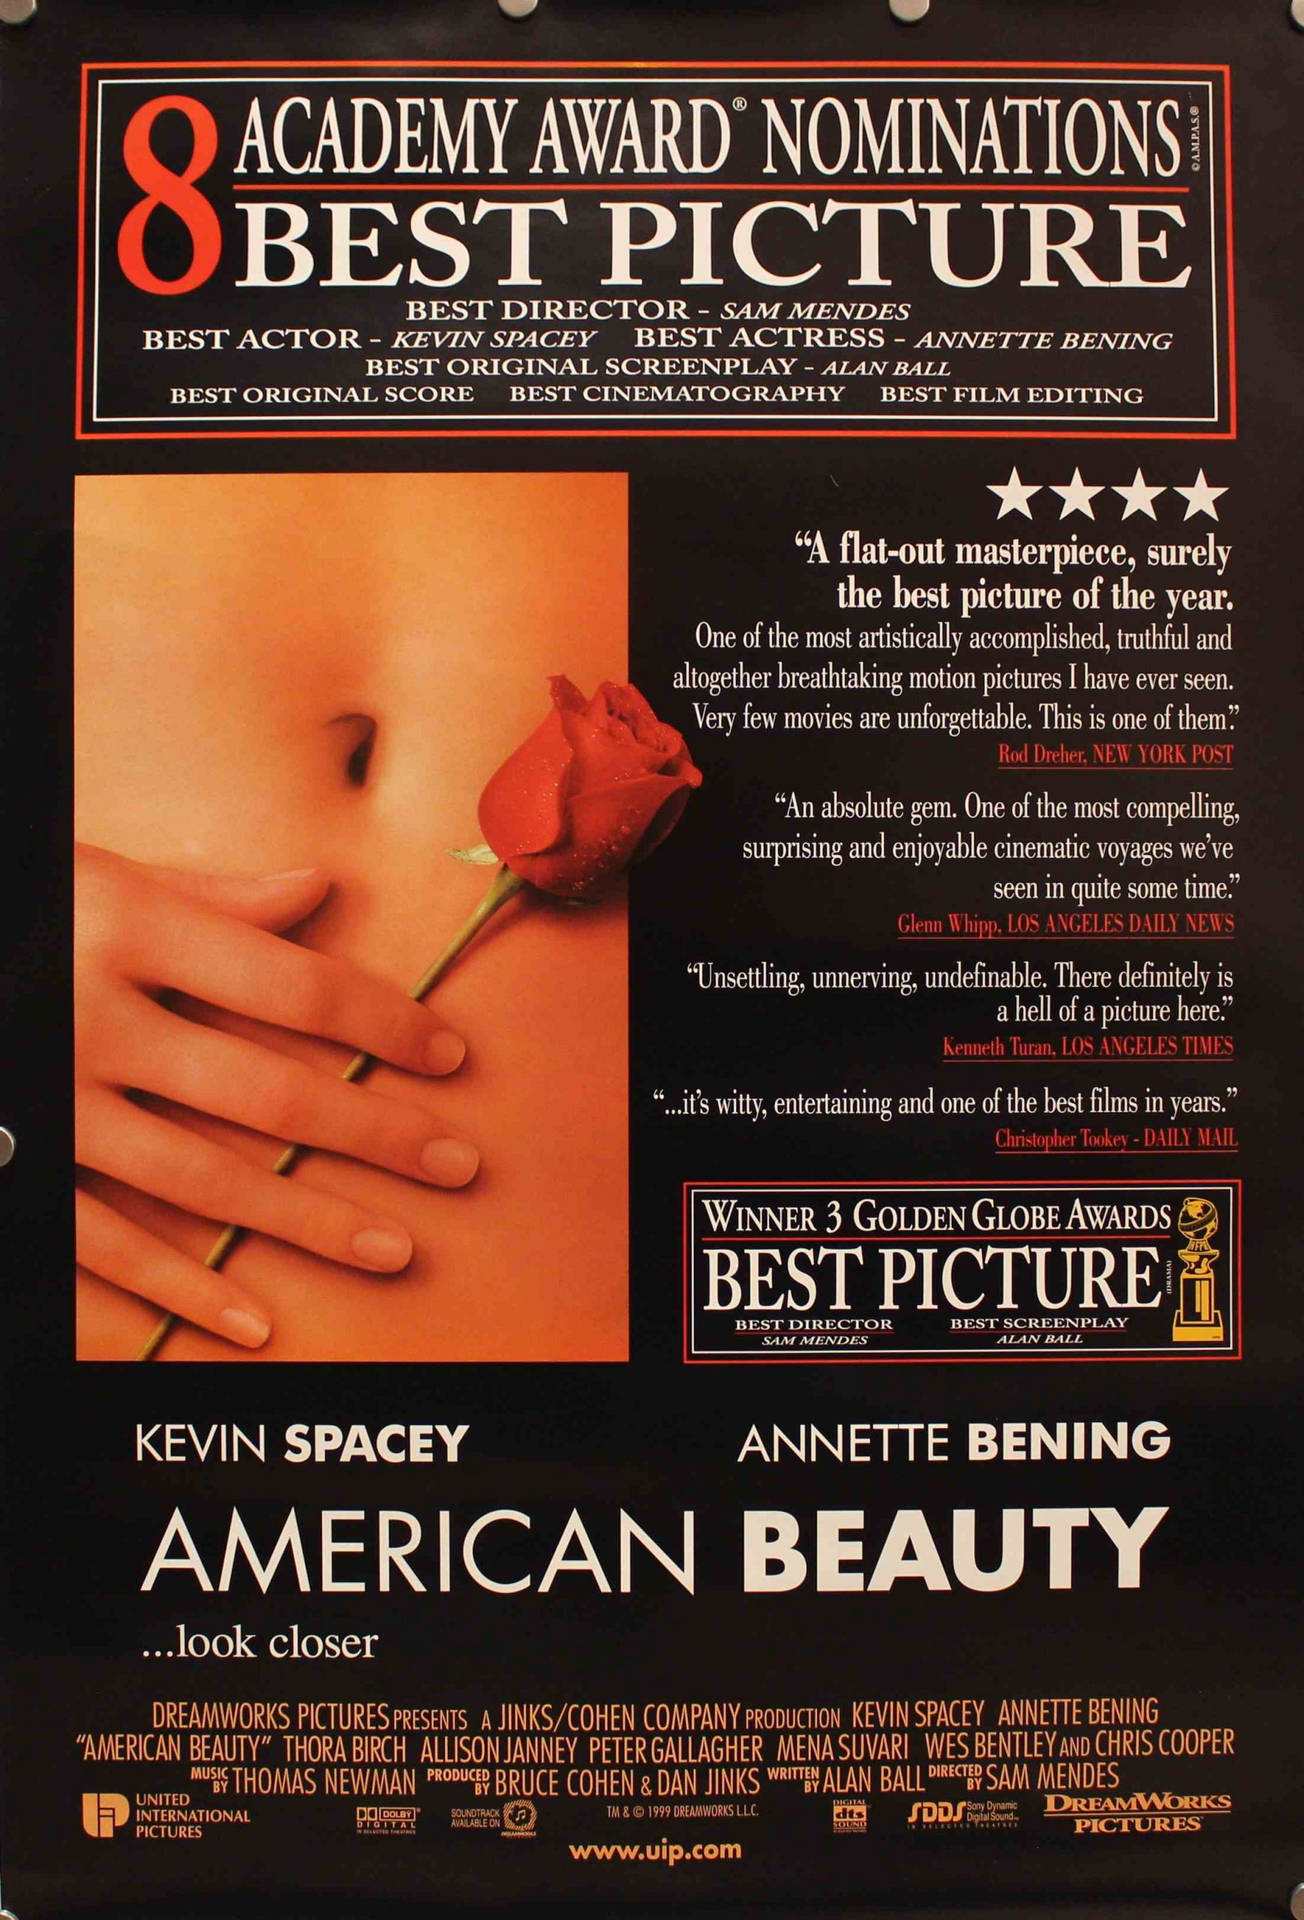 Akademiutmärkelsenamerican Beauty. (this Translation Is A Direct Translation Of The English Sentence. In Context Of Computer Or Mobile Wallpaper, It Could Be Describing The Image Or Design Of A Wallpaper Inspired By The Movie American Beauty, Which Won An Academy Award.) Wallpaper